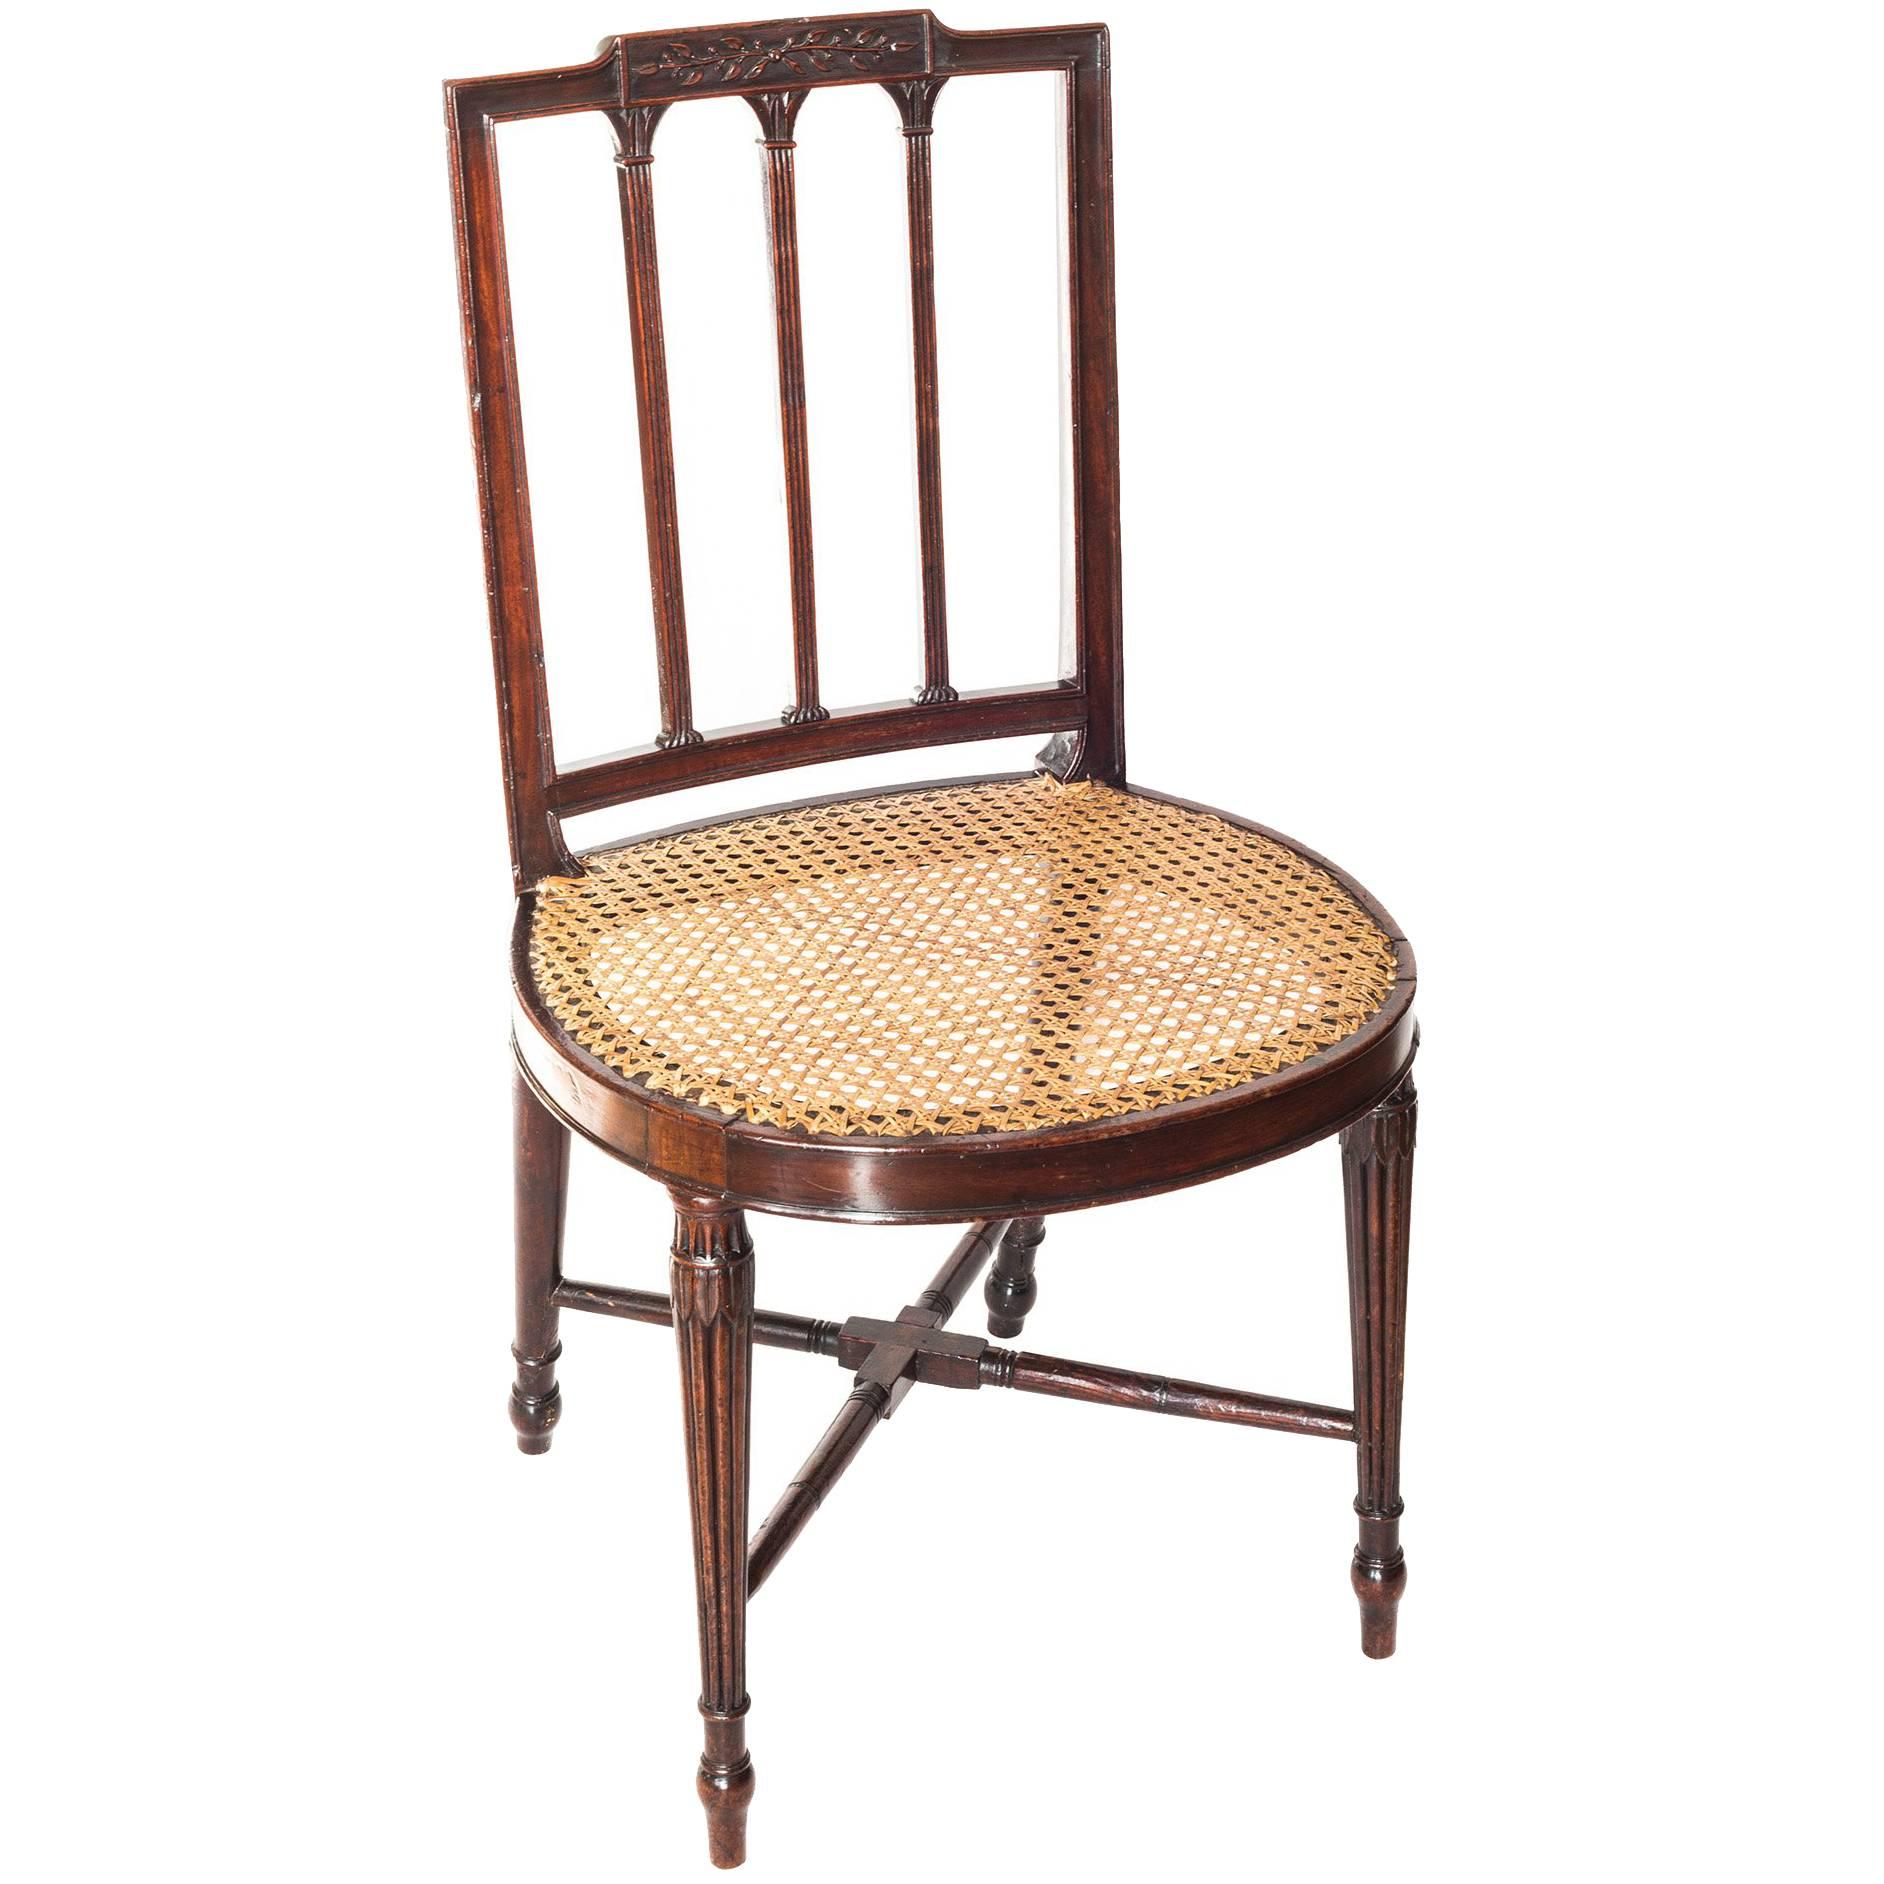 Fine George III Period Neoclassical Mahogany Side Chair, Manner of Gillows